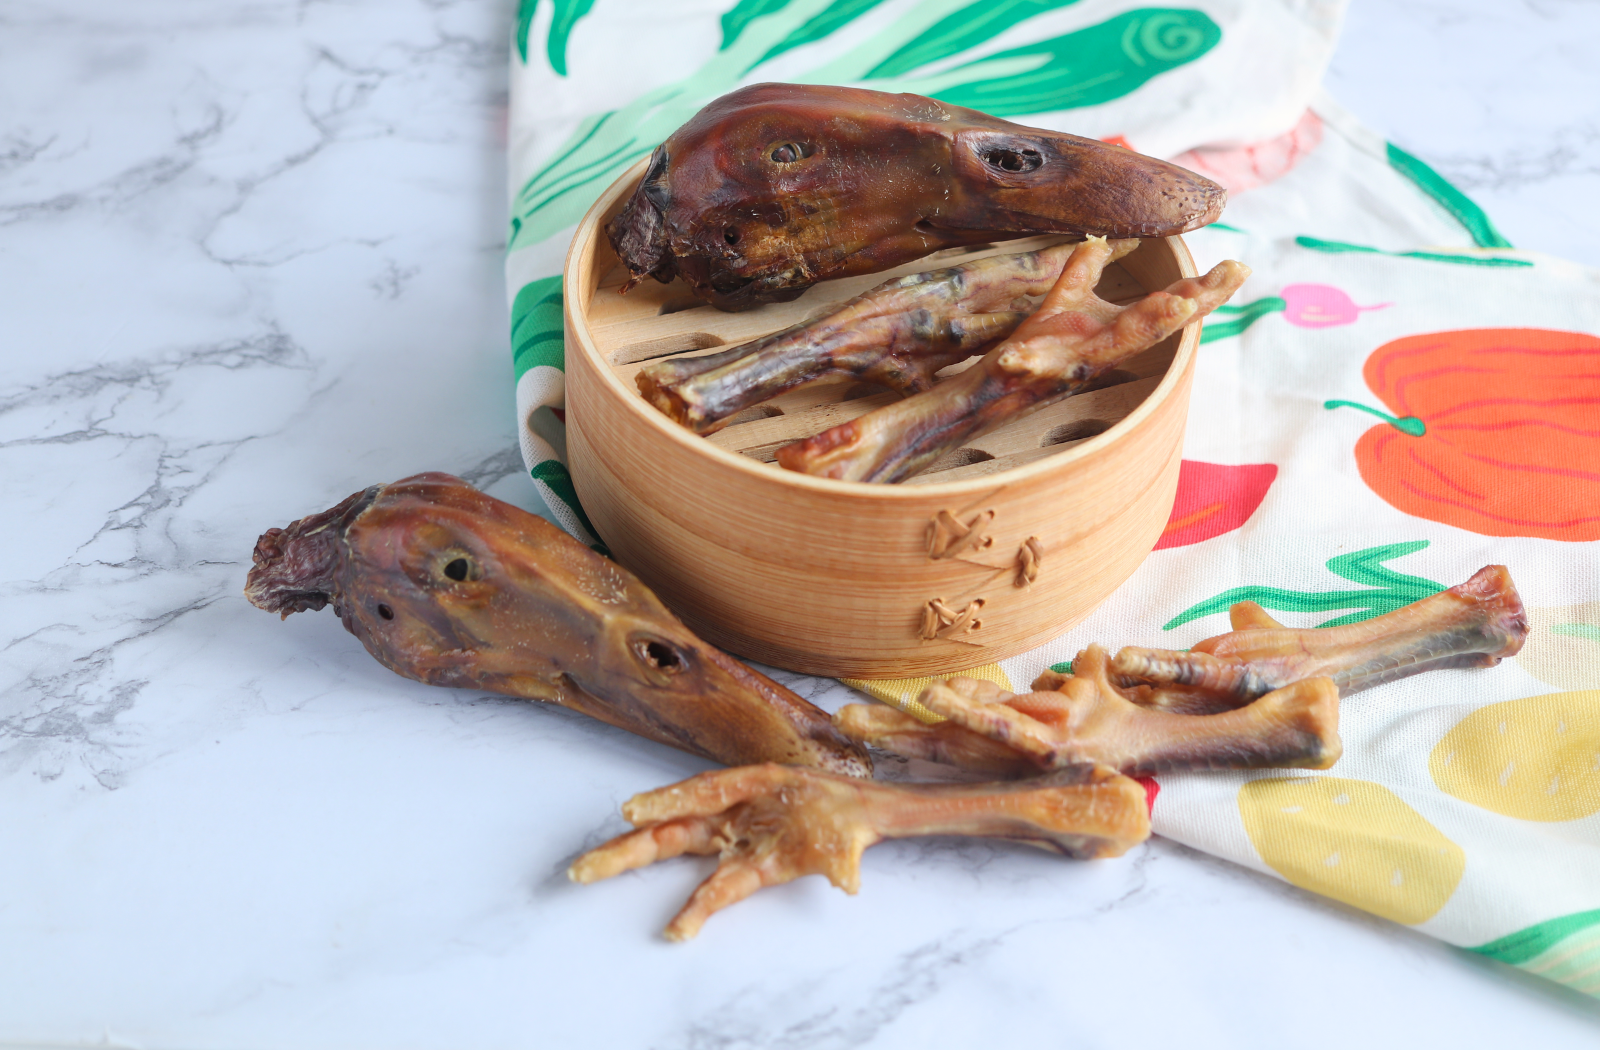 dehydrated duck head and chicken feet